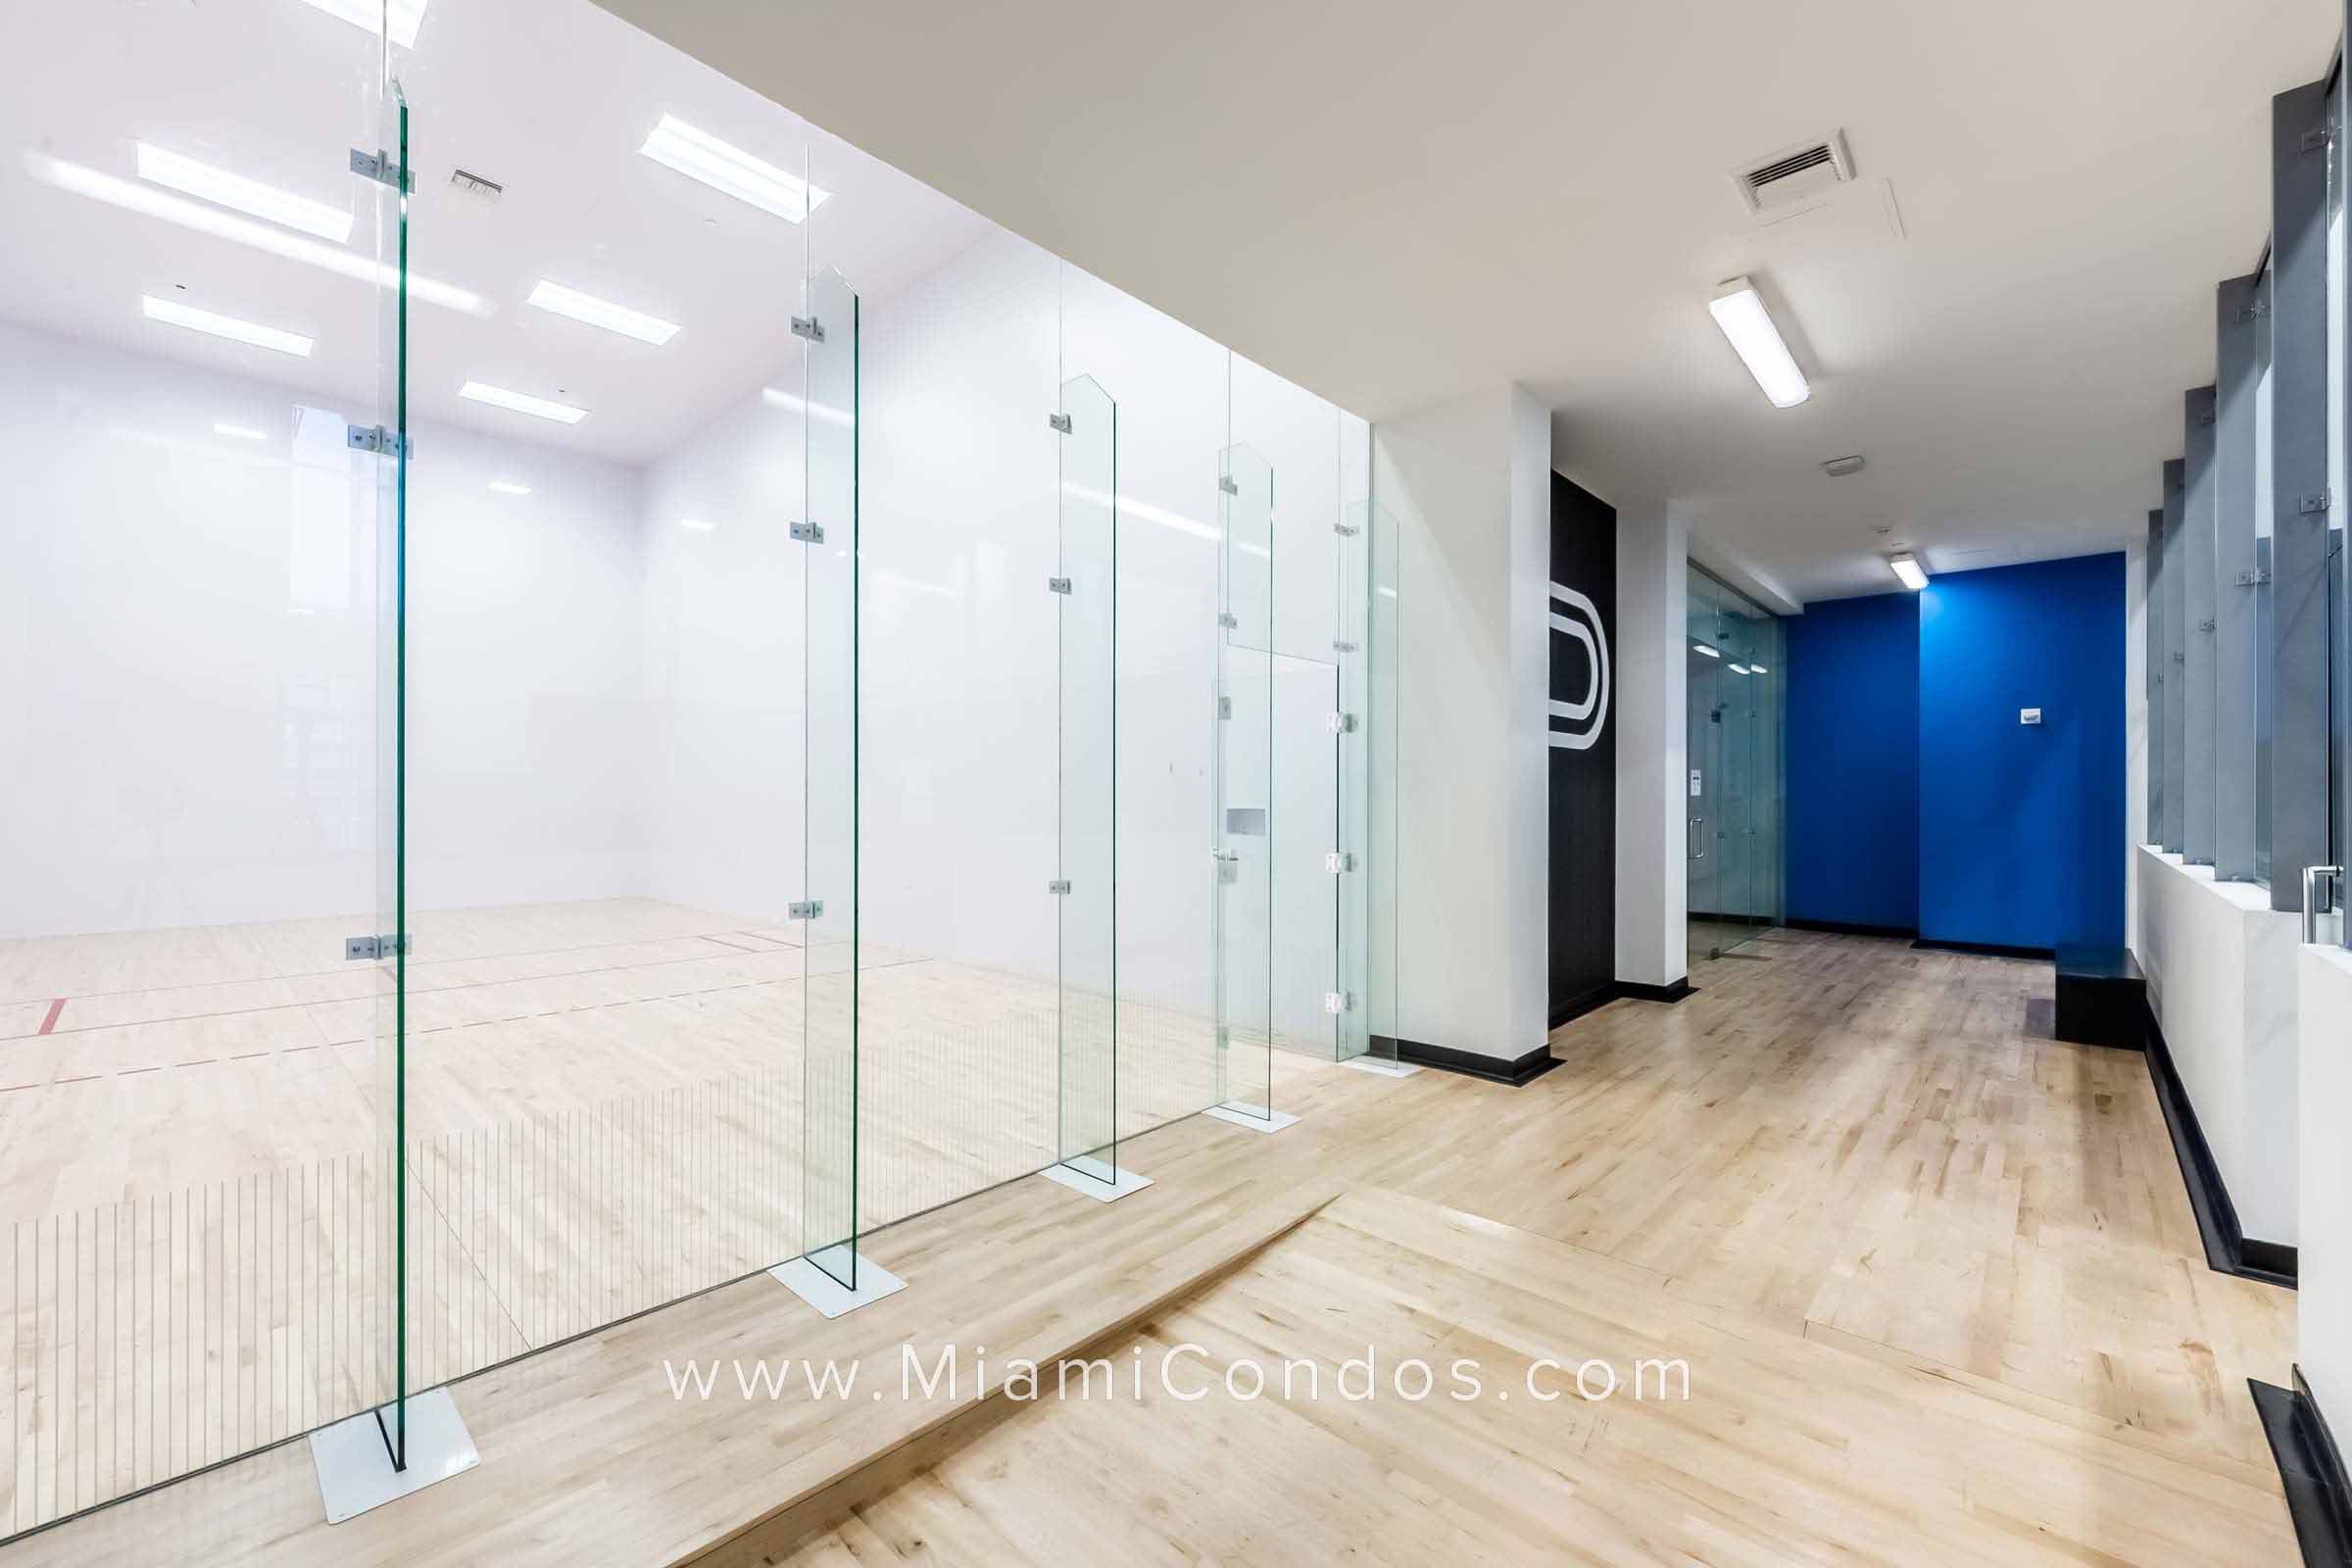 Paramount Miami Worldcenter Racquetball Court